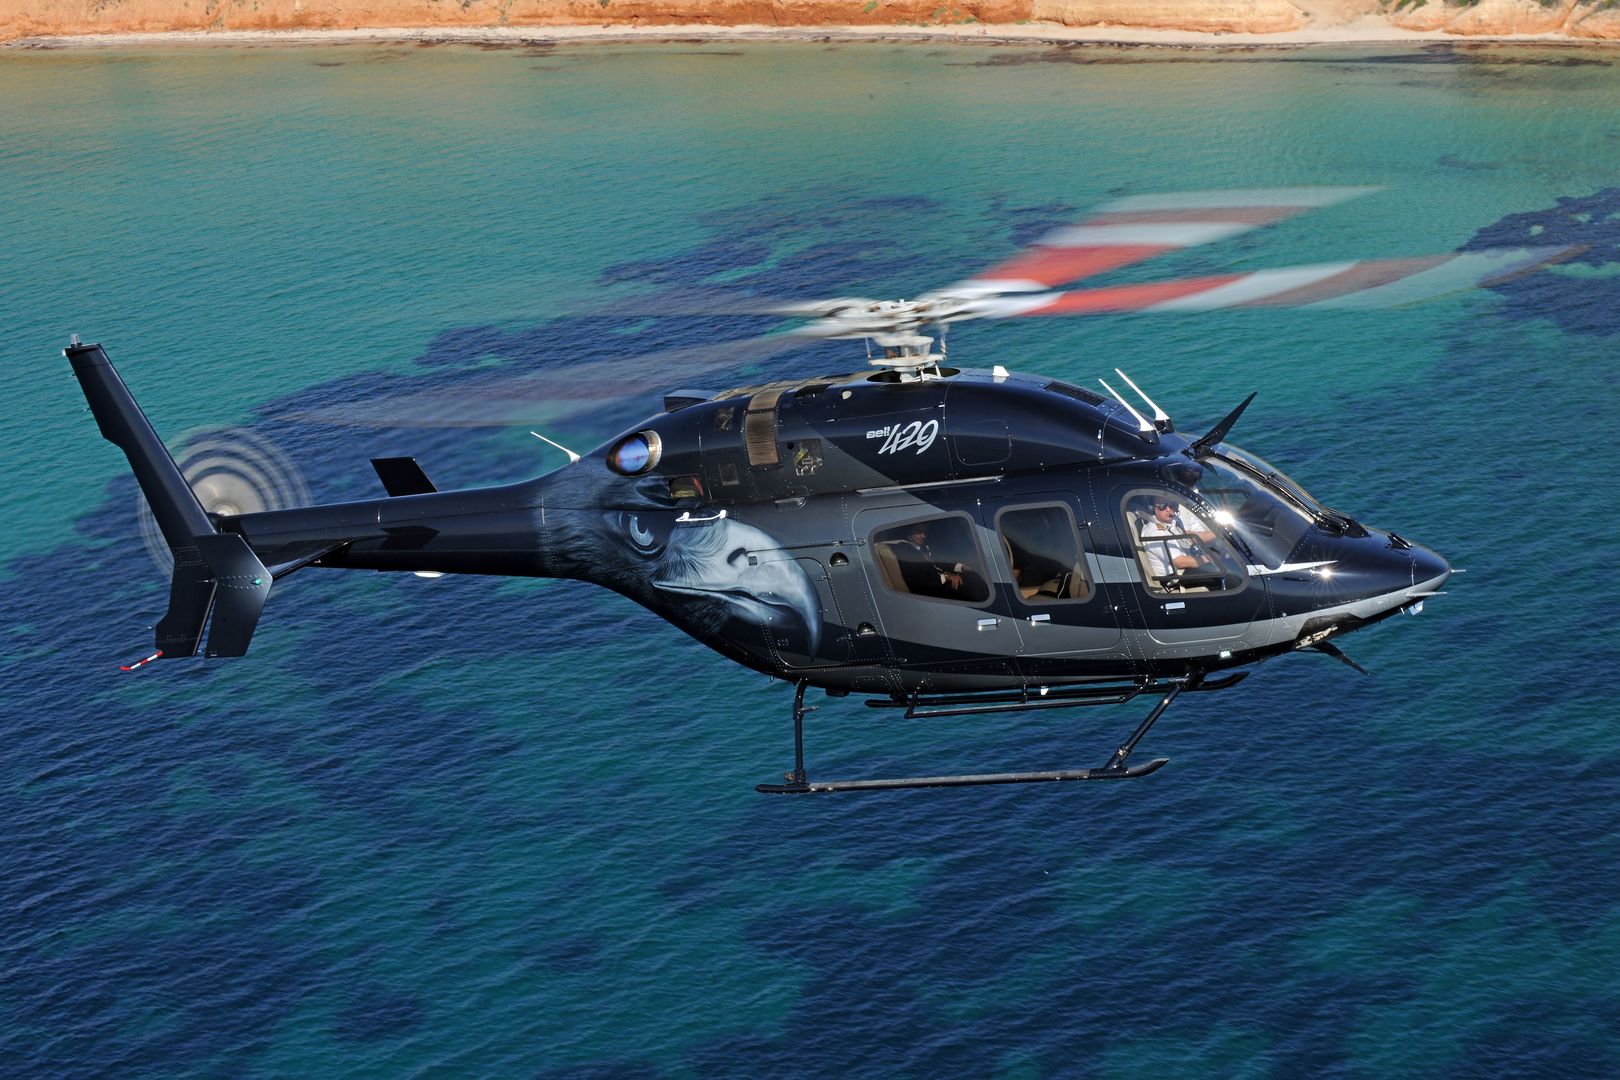 The Bell 429 is chosen by corporate customers, police forces and medical teams around the world for time-sensitive missions. The aircraft will be on display at this year’s MEBAA show, along with the Bell 505 Jet Ranger X. Bell Photo